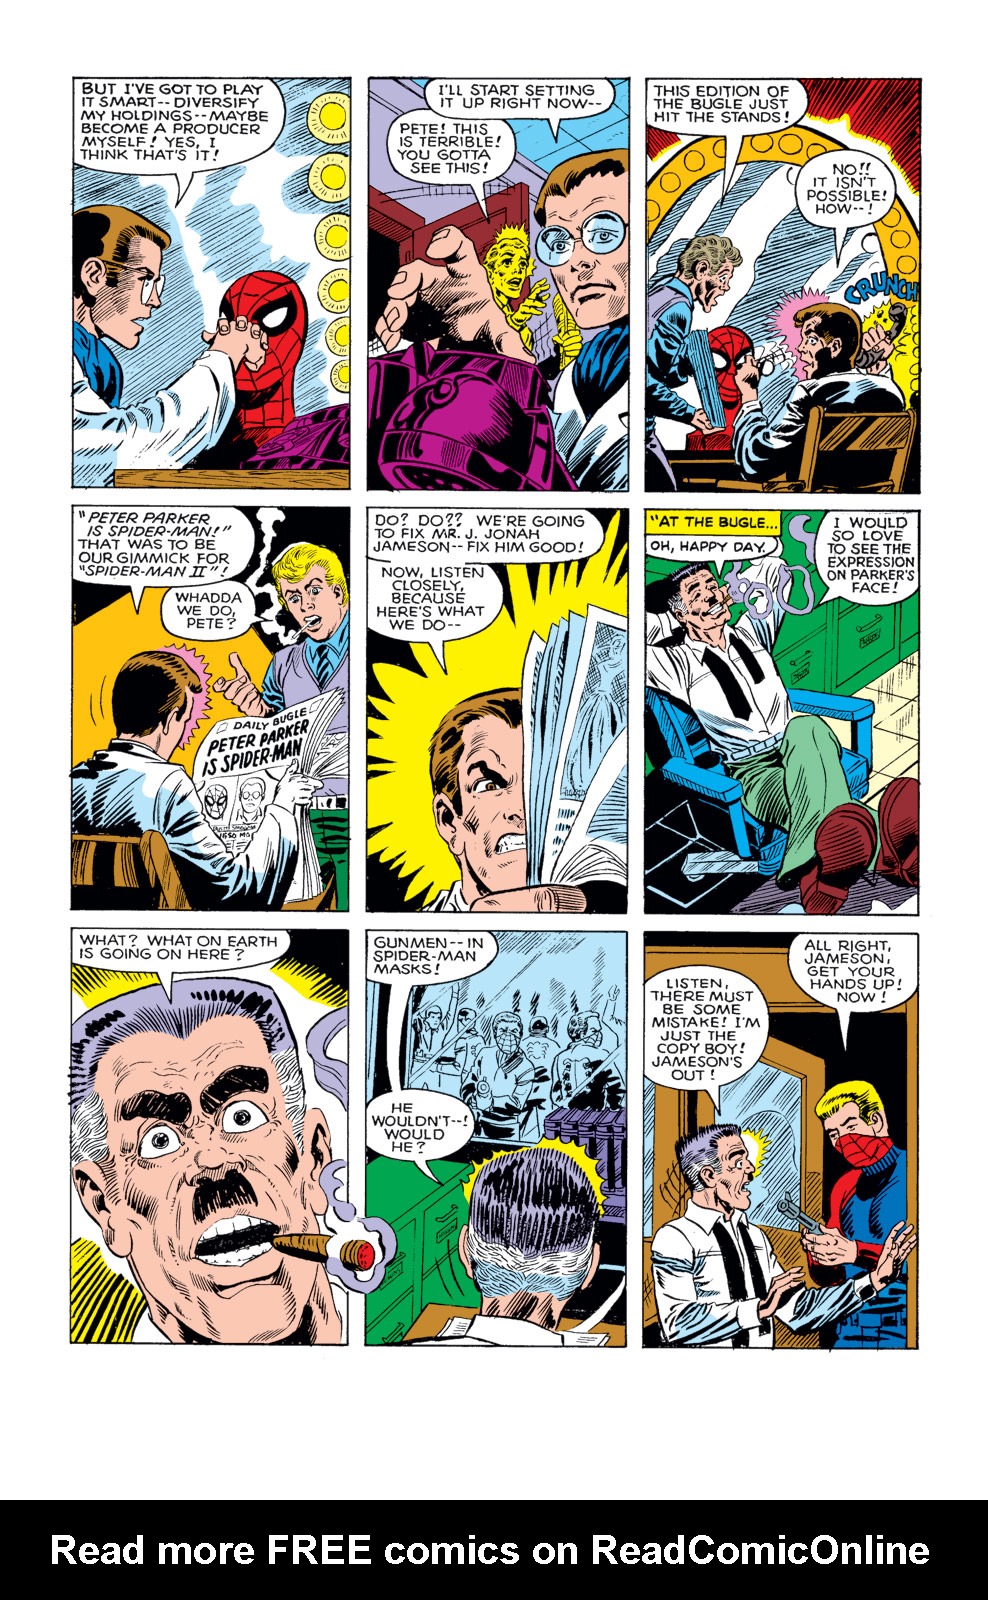 What If? (1977) issue 19 - Spider-Man had never become a crimefighter - Page 12